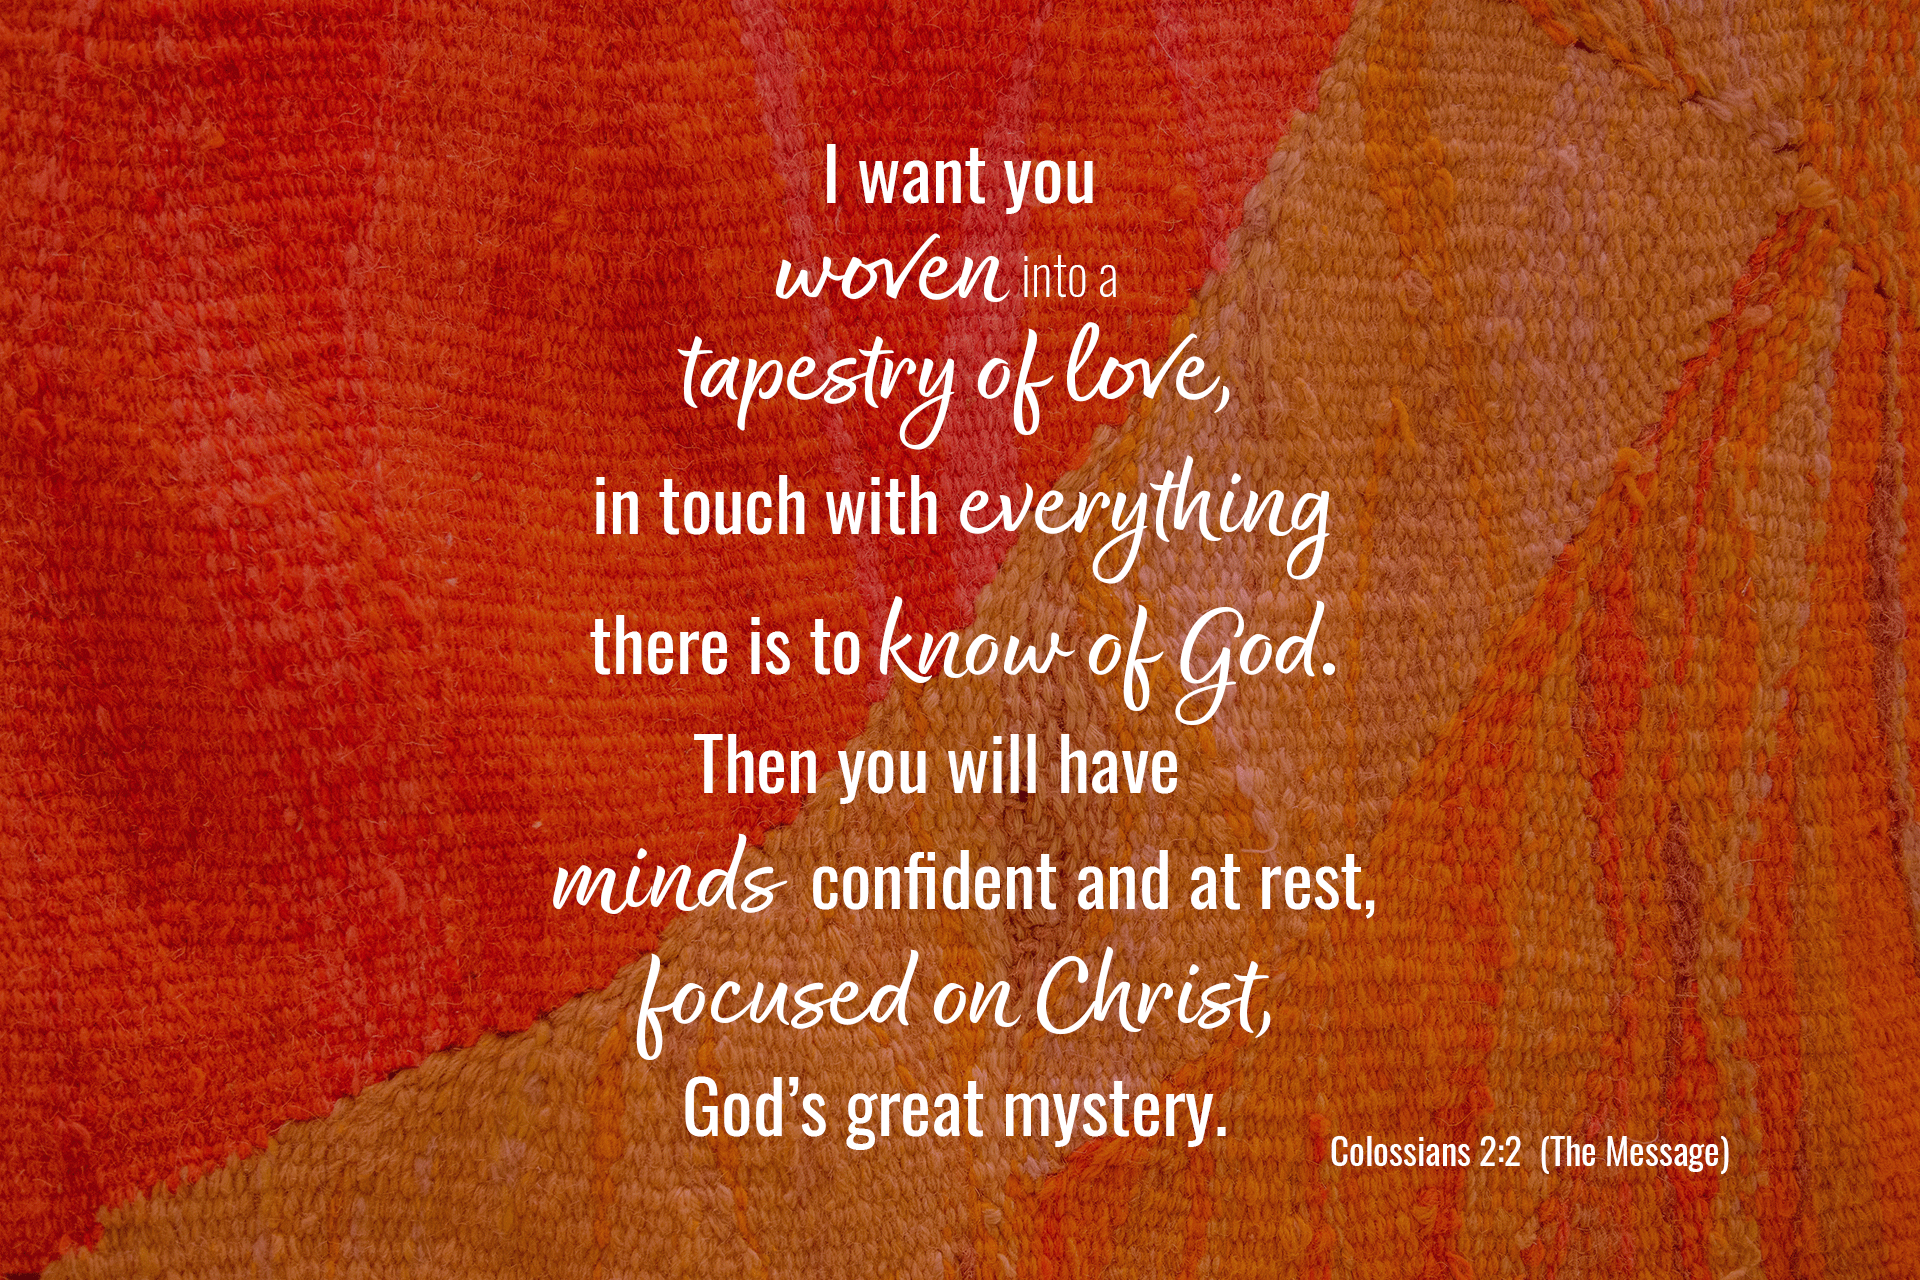 Stylized verse over tapestry background: I want you woven into a tapestry of love,  in touch with everything there is to know of God. Then you will have minds confident and at rest,  focused on Christ, God’s great mystery. Colossians 2:2 (The Message)